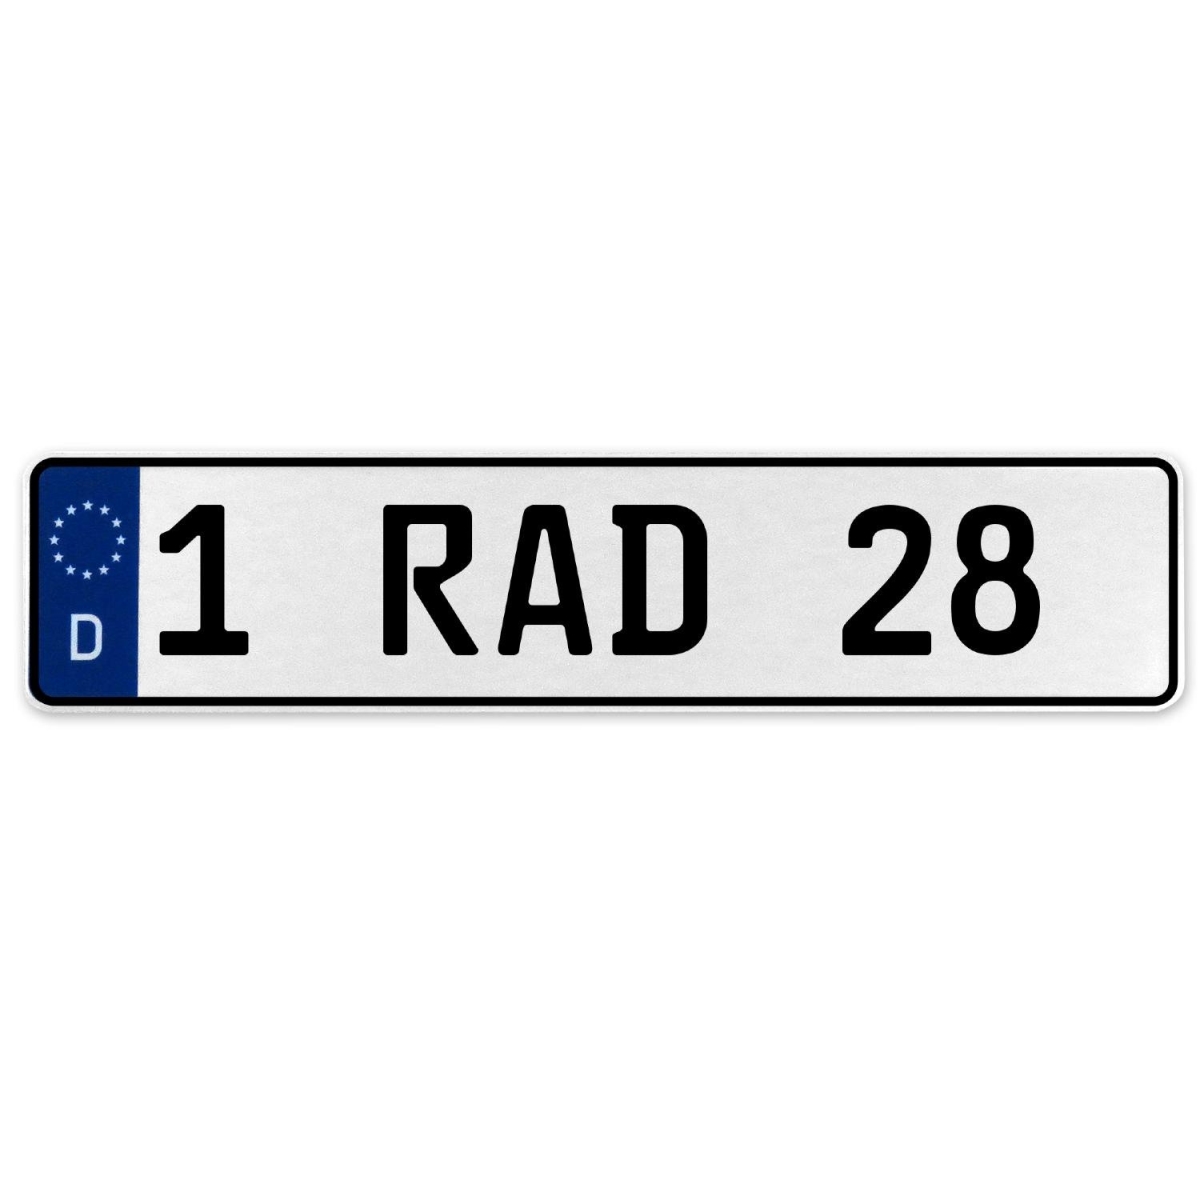 1 Rad 28 - White Aluminum Street Sign Mancave Euro Plate Name Door Sign Wall